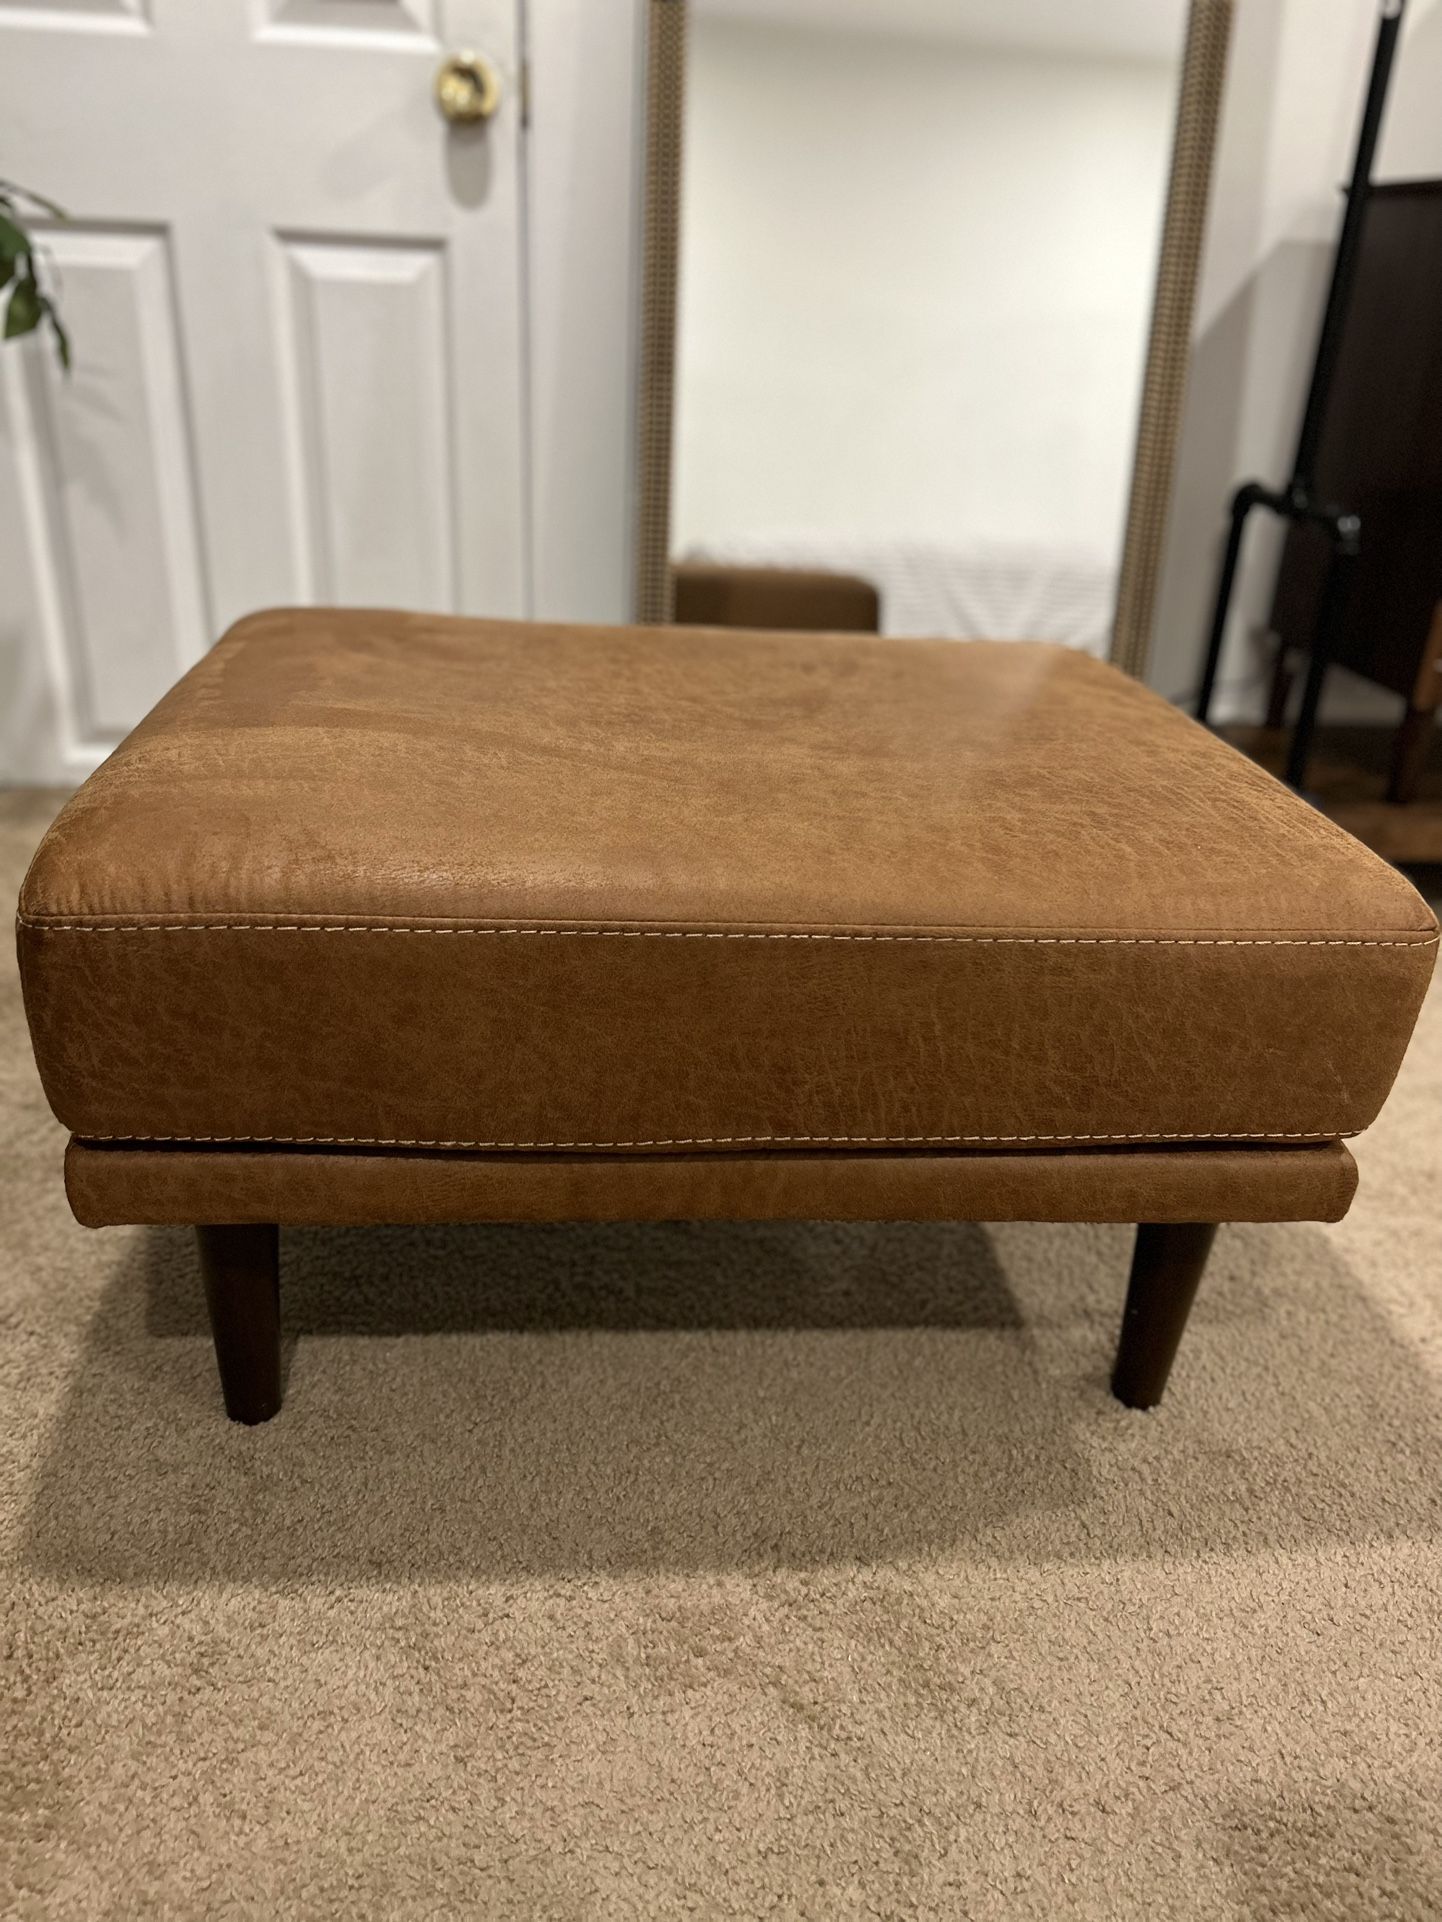 Brown Ottoman from Home Goods